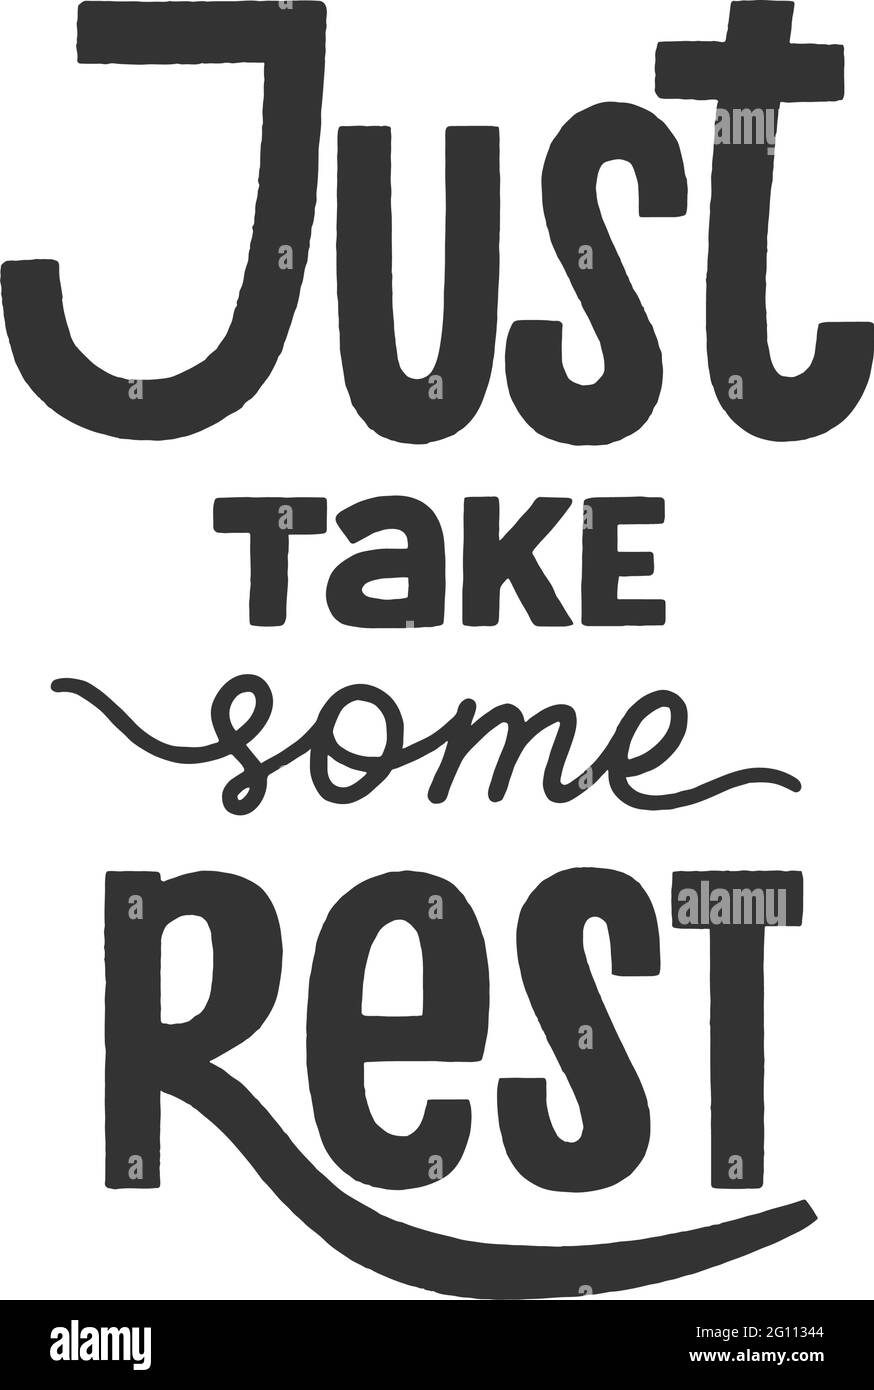 Just take some rest phrase, recreation and relaxation quote for